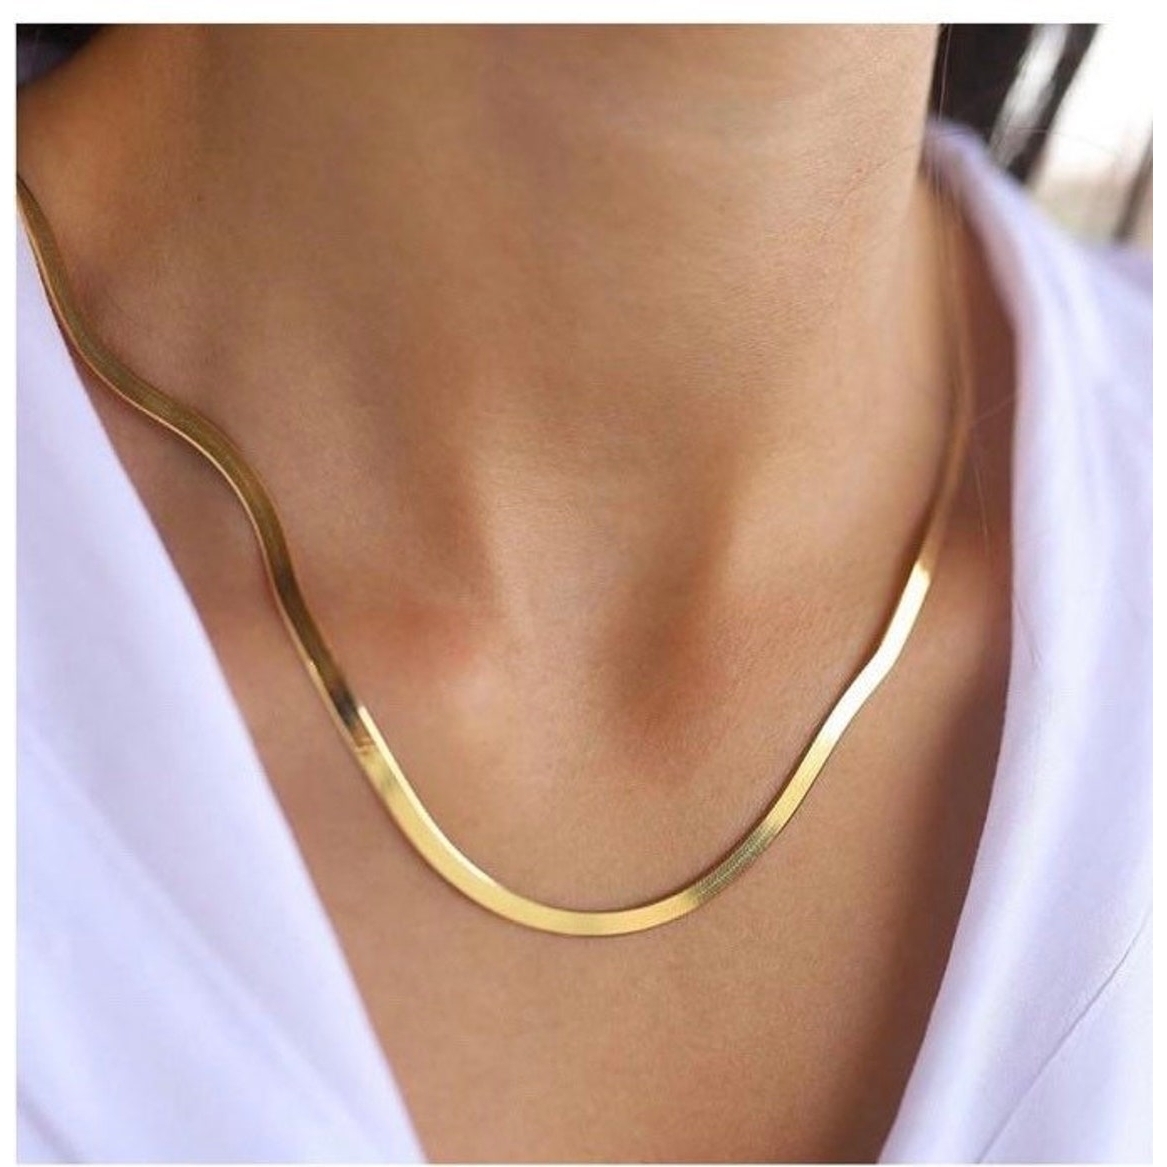 14K Gold Filled Herringbone Necklace, Layering Necklace, Filled High Polish Finsh Snake Chain, Gold Filled STAINLESS STEEL, Gift For Mom - G